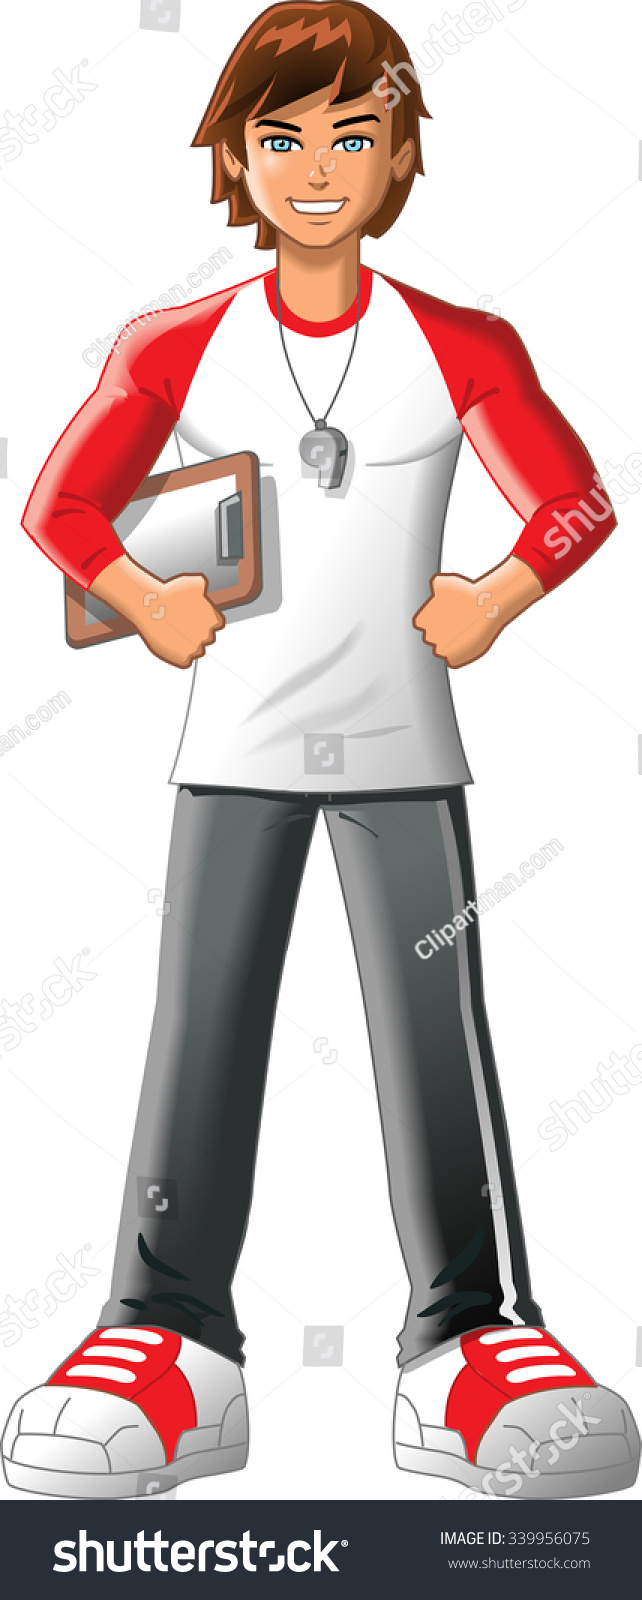 fitness instructor clipart - photo #27